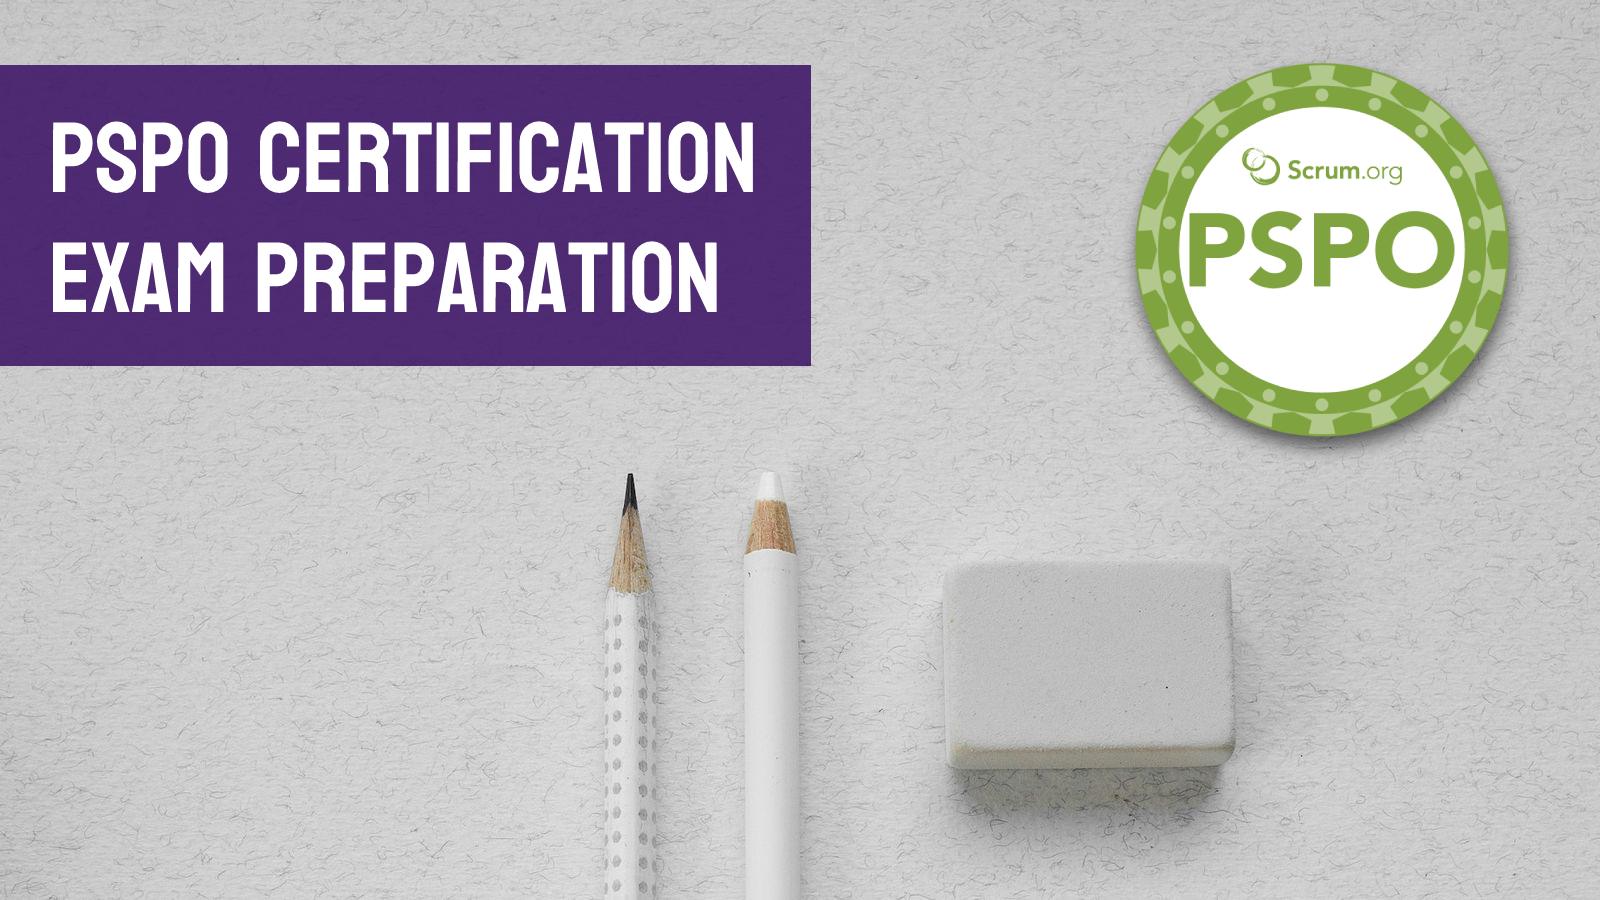 A guide to preparing for the Professional Scrum Product Owner certification